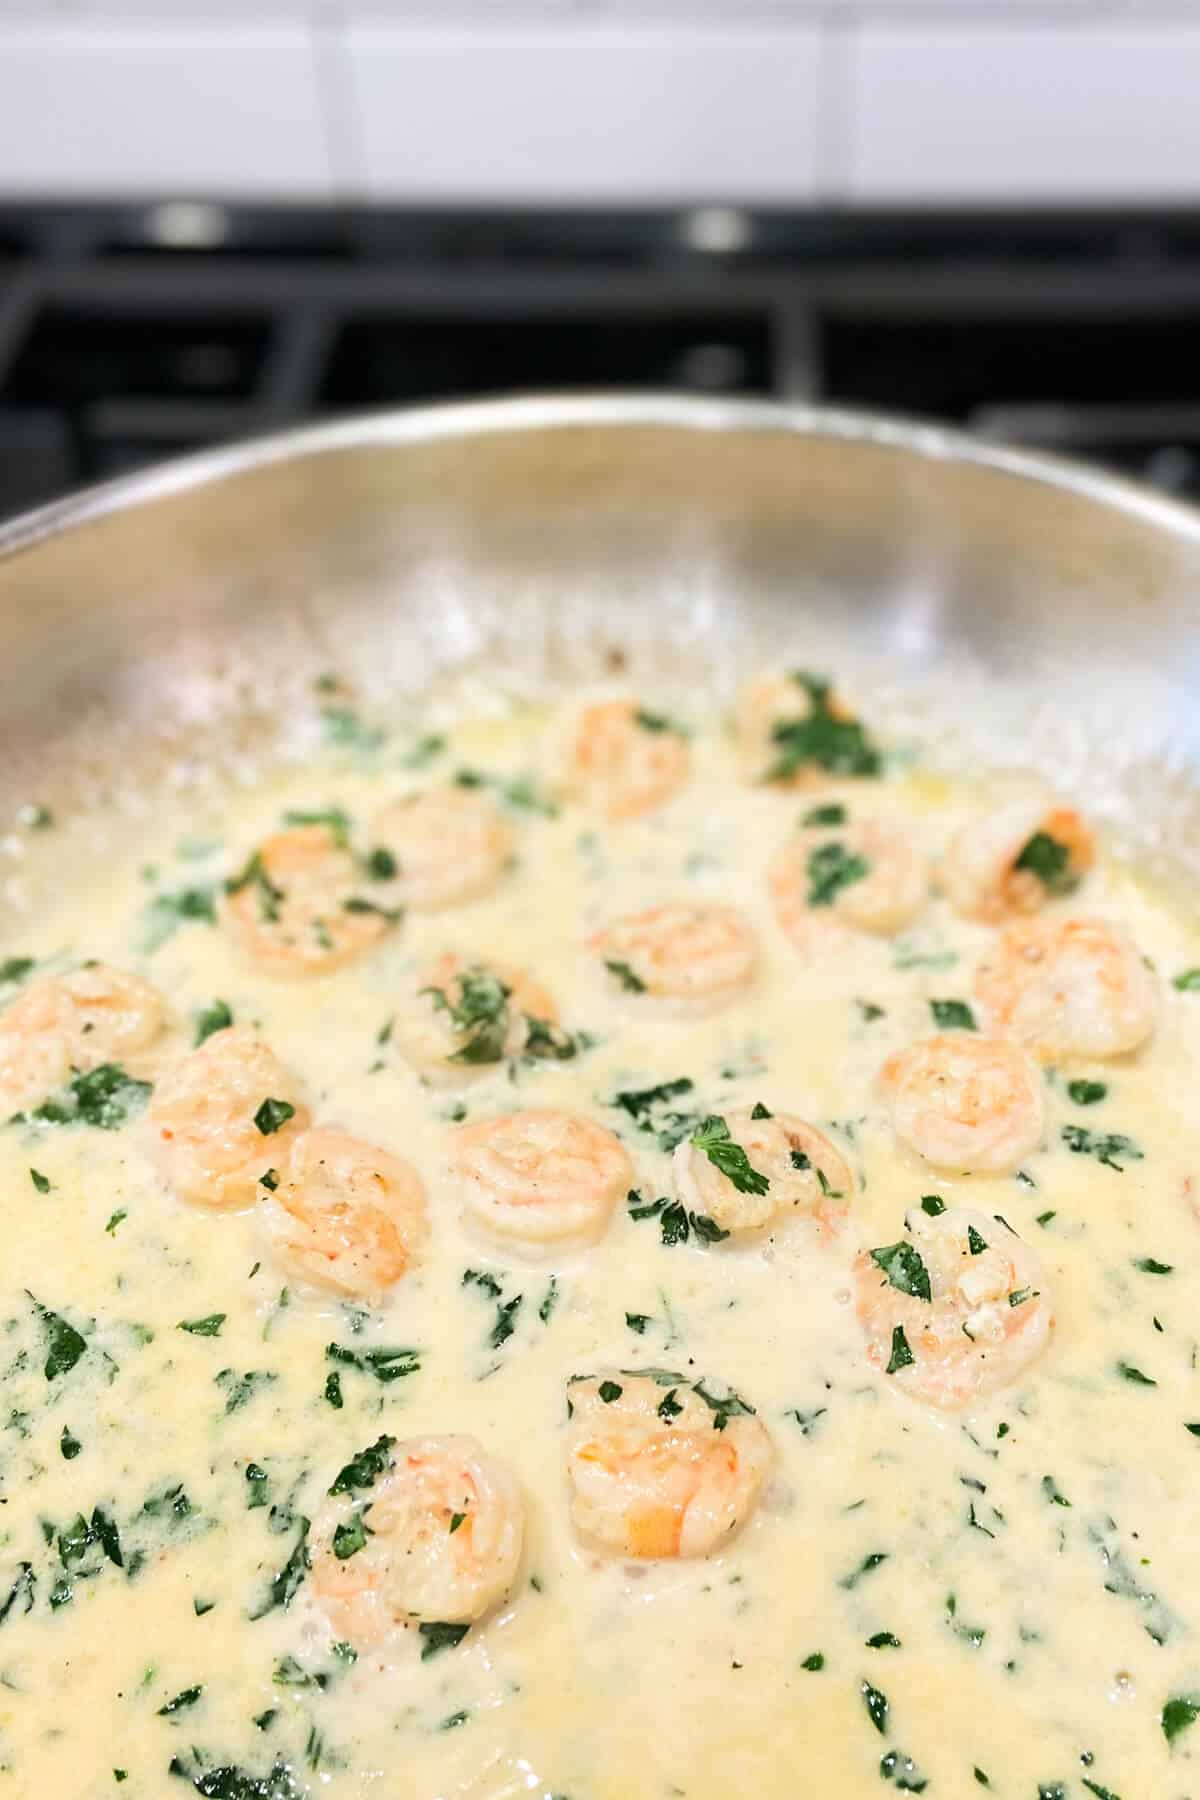 Shrimp cooking in cream sauce with parsley.